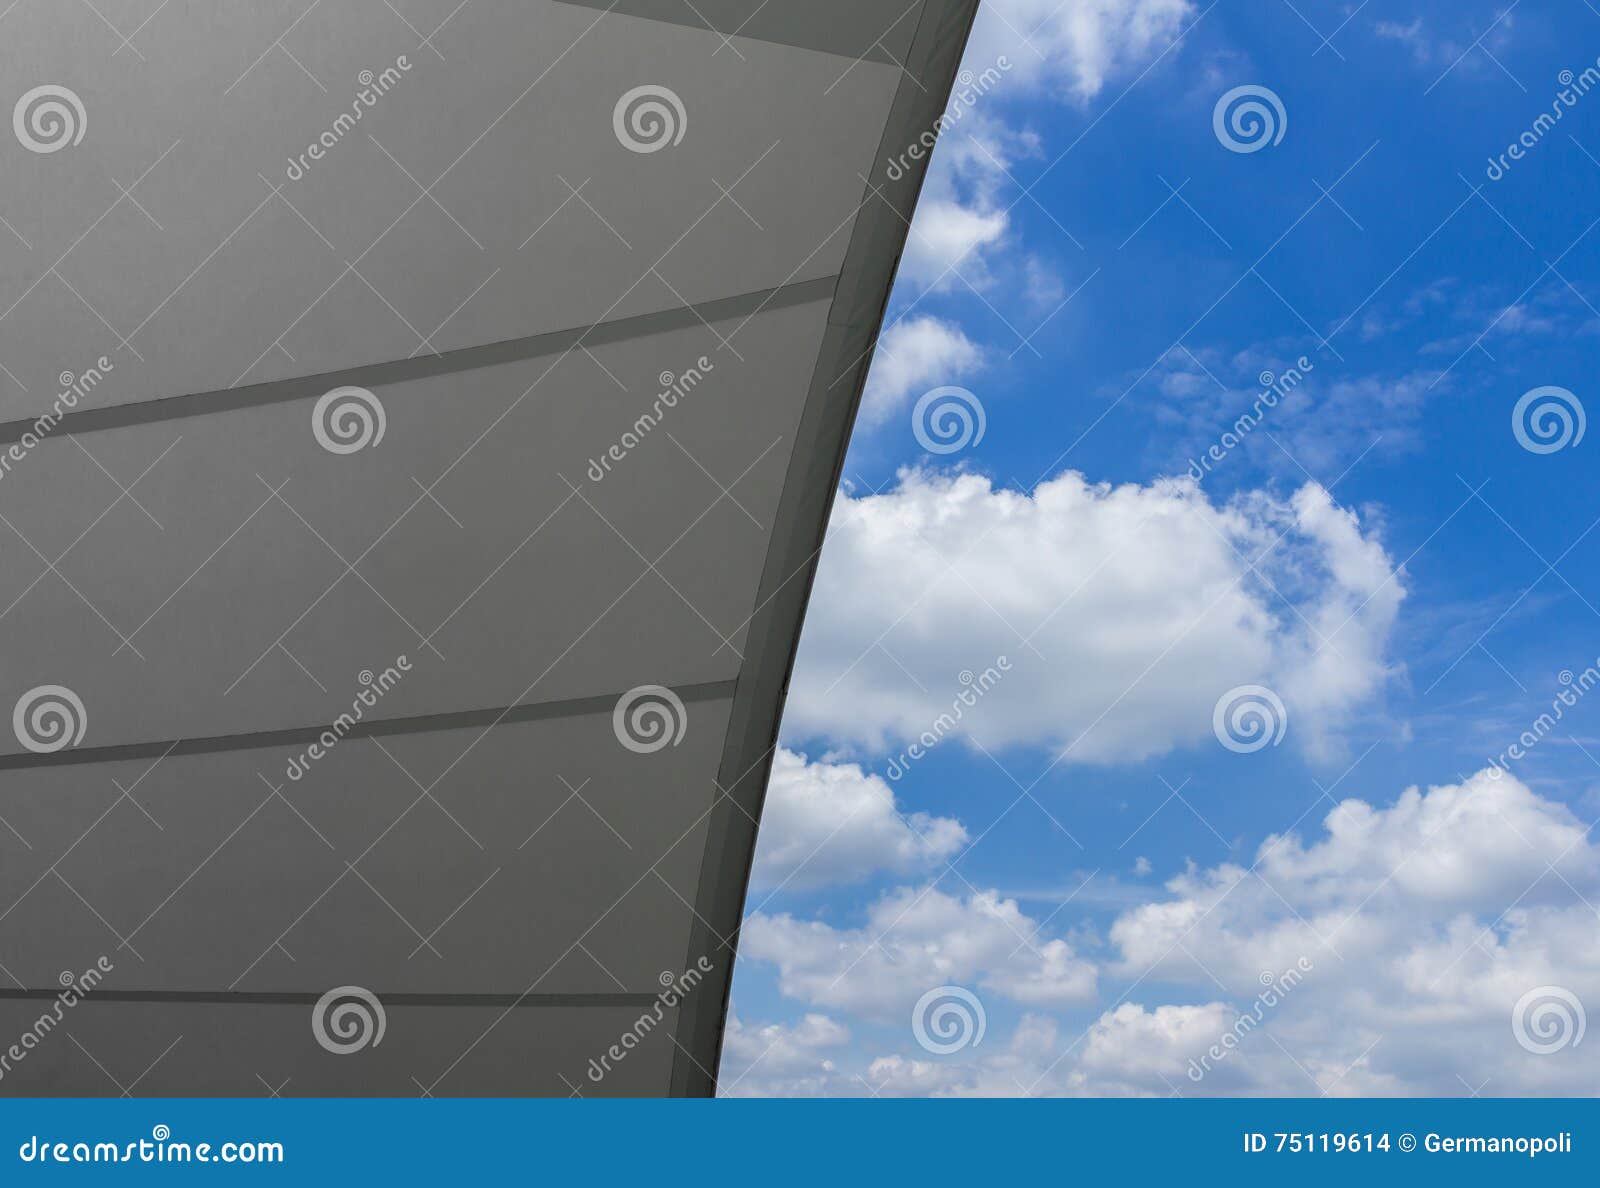 Tensile structure stock photo. Image of exterior, cloud - 75119614